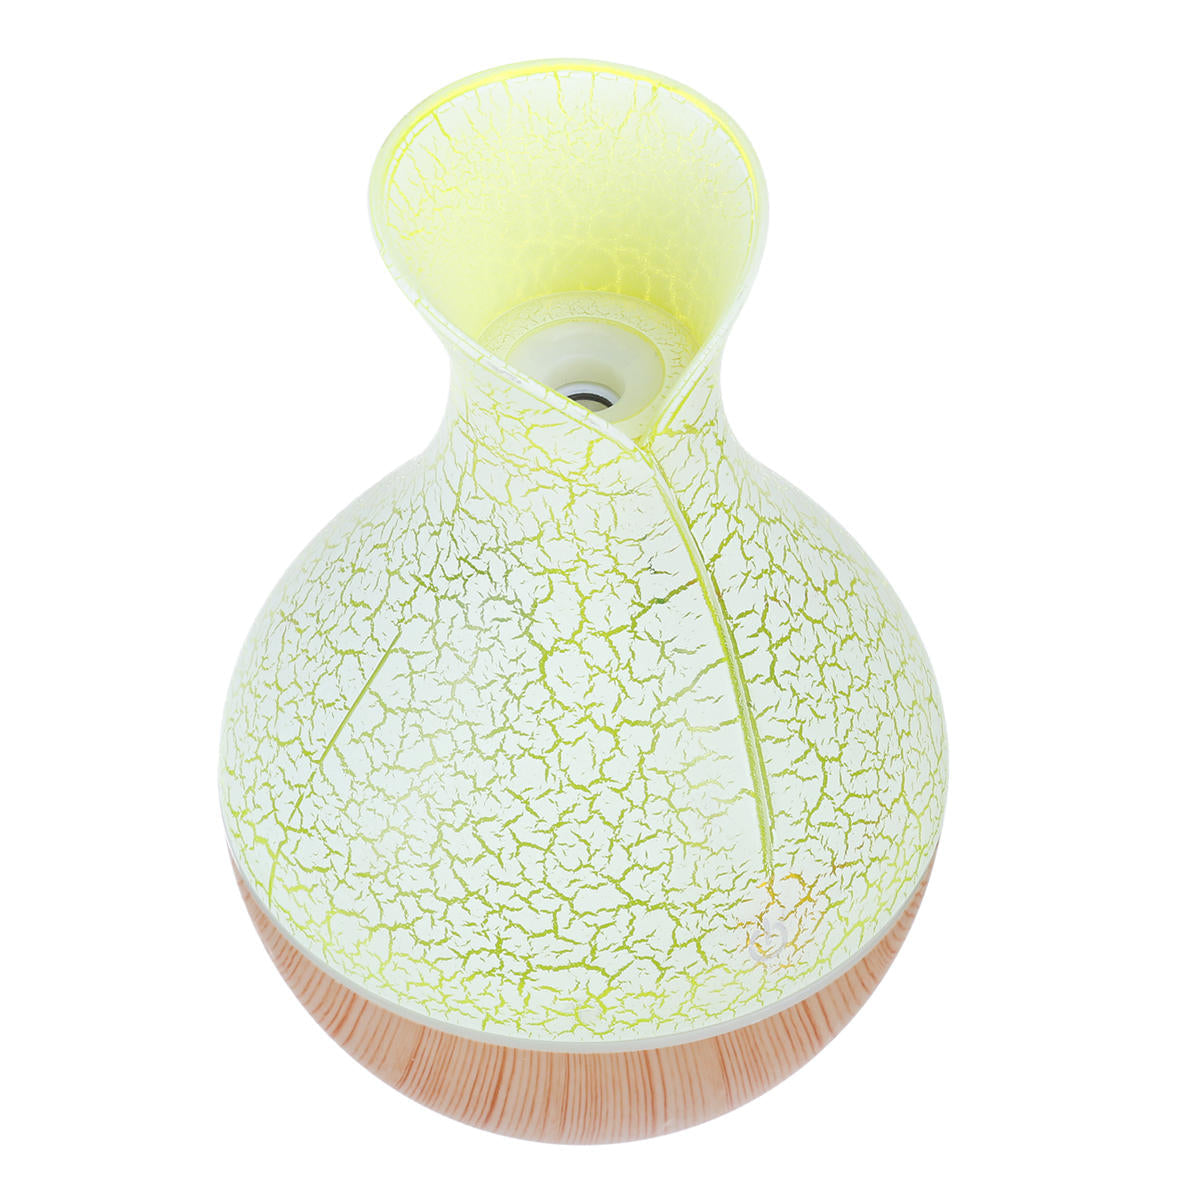 130ml LED USB Mini Vase Ultrasonic Air Humidifier Low Noise Aromatherapy Diffuser Mist Maker with 7 Colors Light